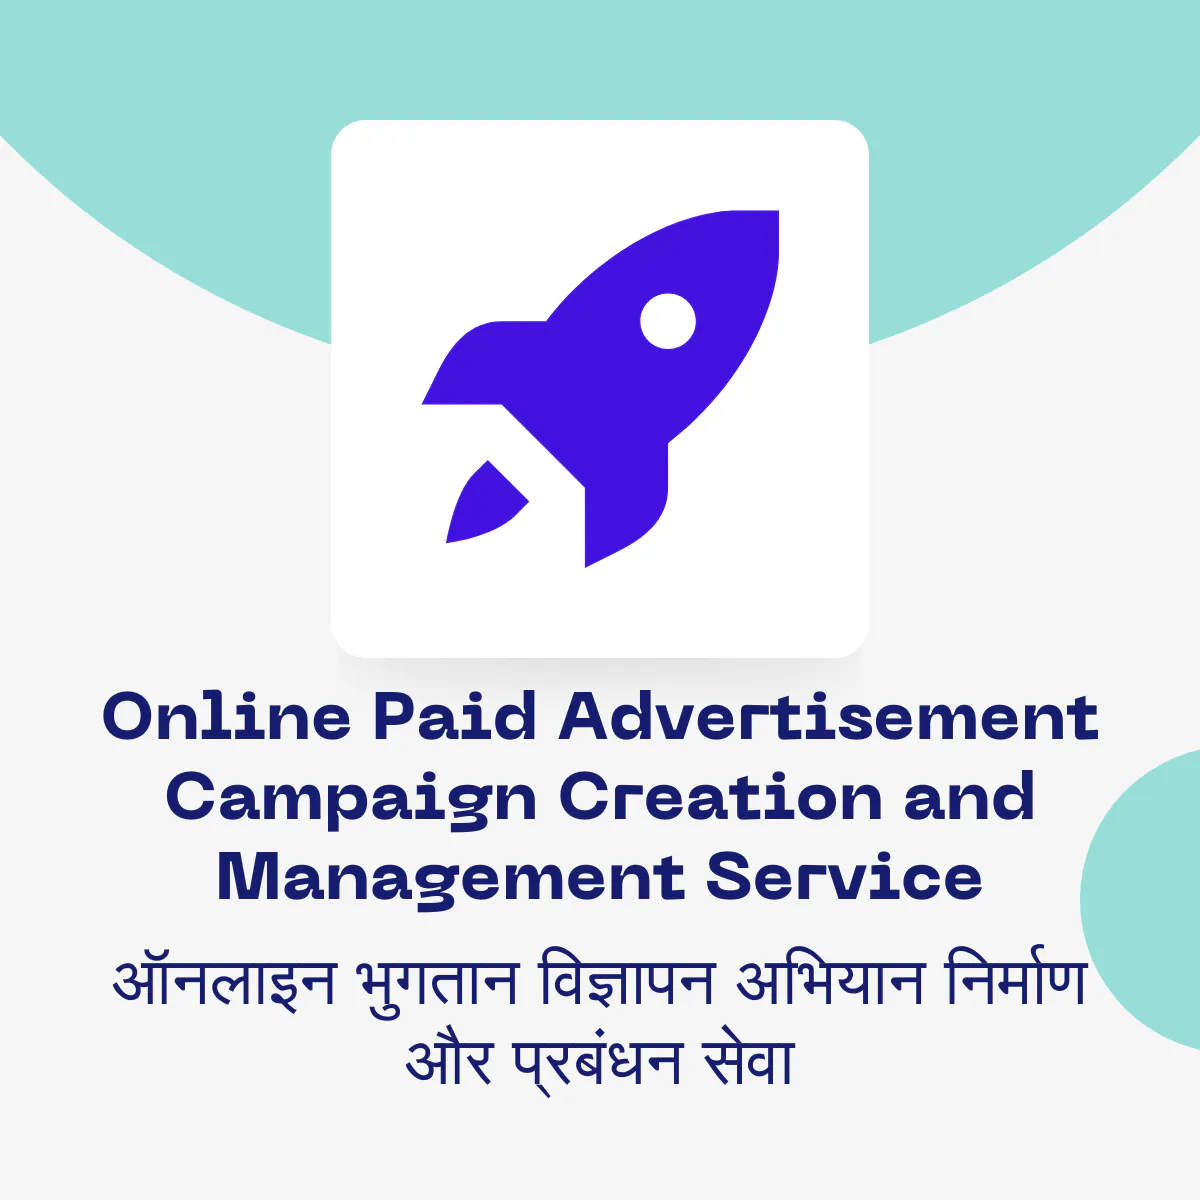 Online Paid Advertisement Campaign Creation and Management Service